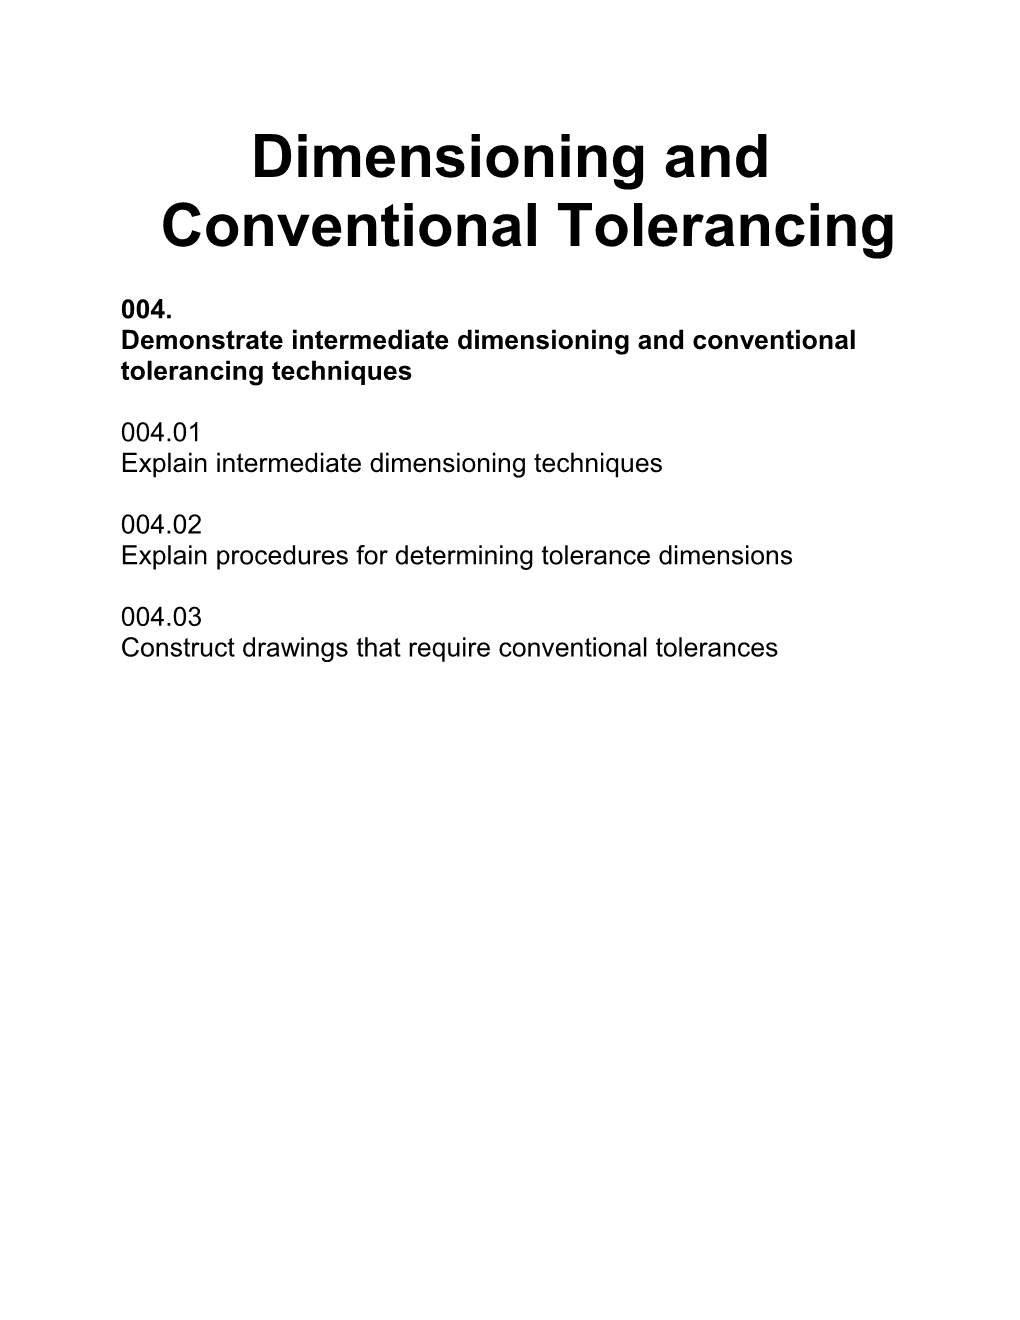 Dimensioning and Conventional Tolerancing